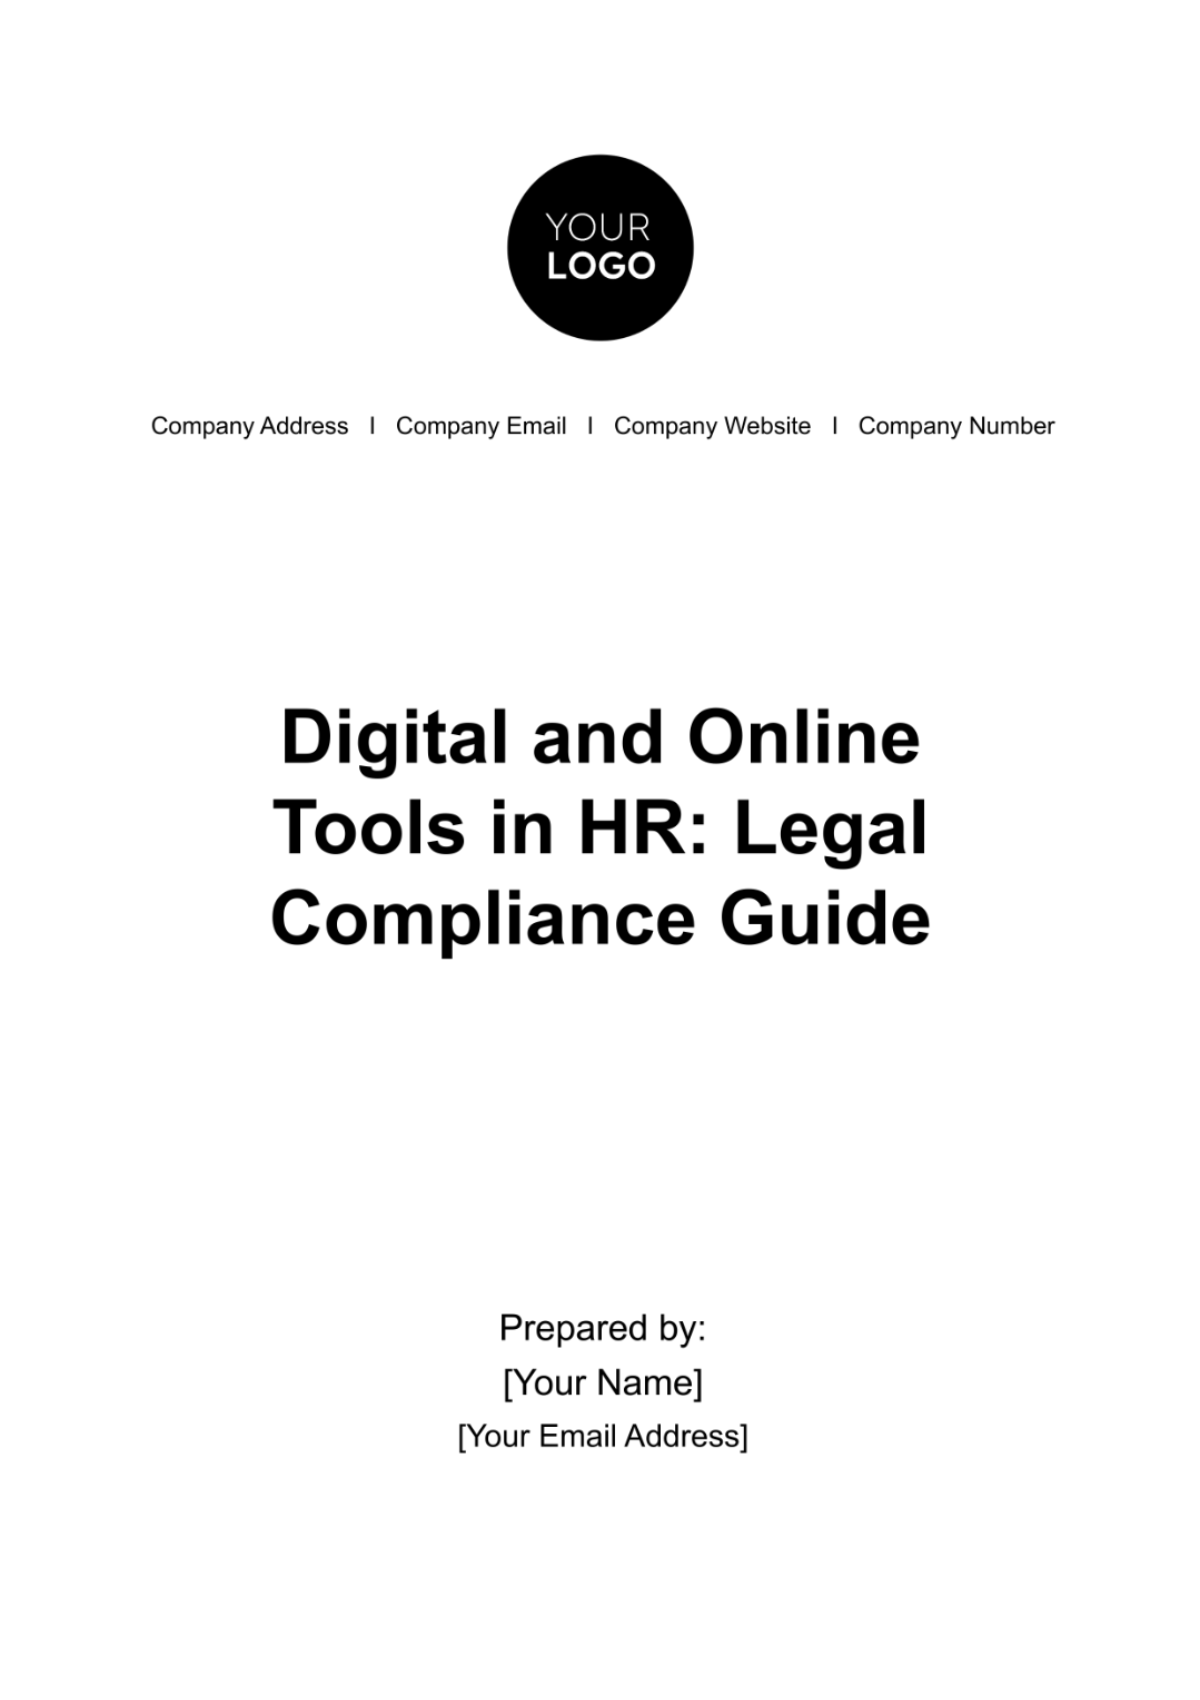 Free Digital and Online Tools in HR: Legal Compliance Guide Template